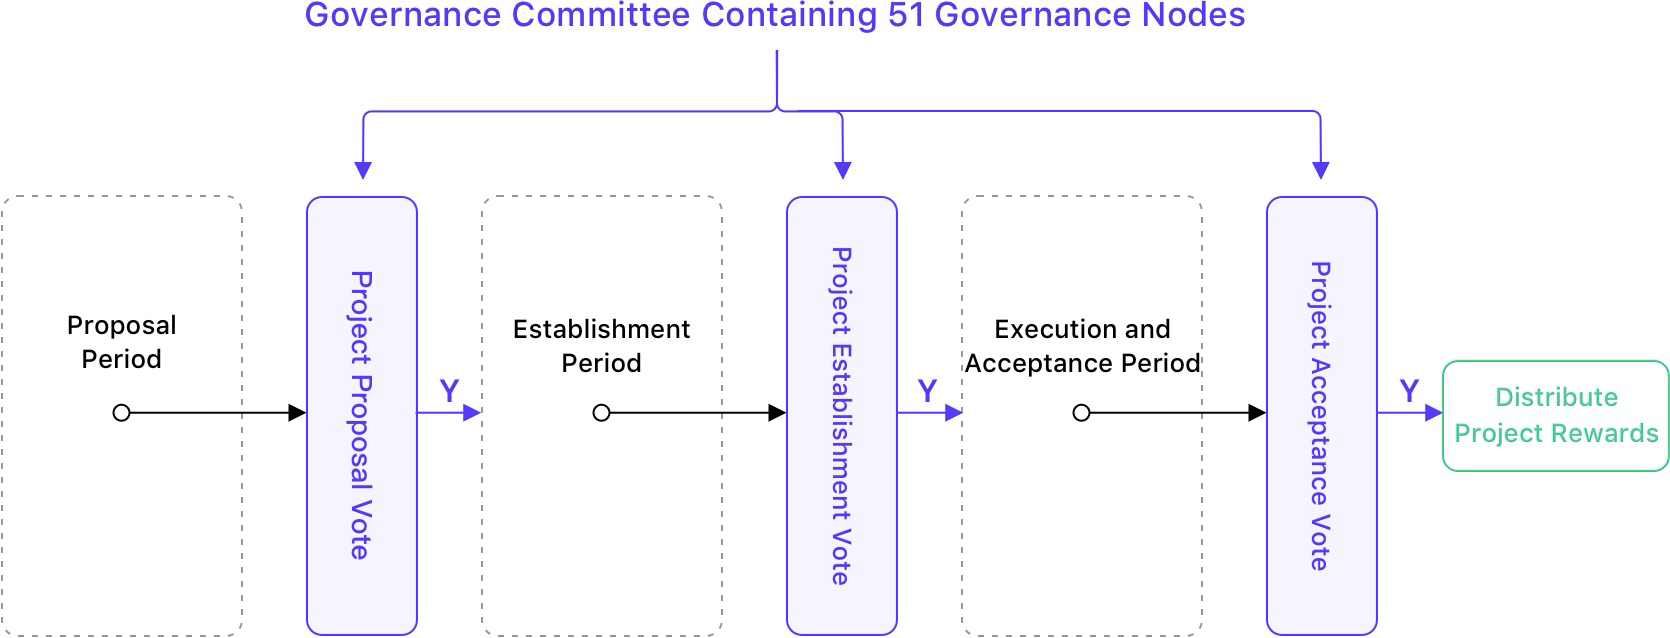 Figure 3.1 Governance Committee Voting Process